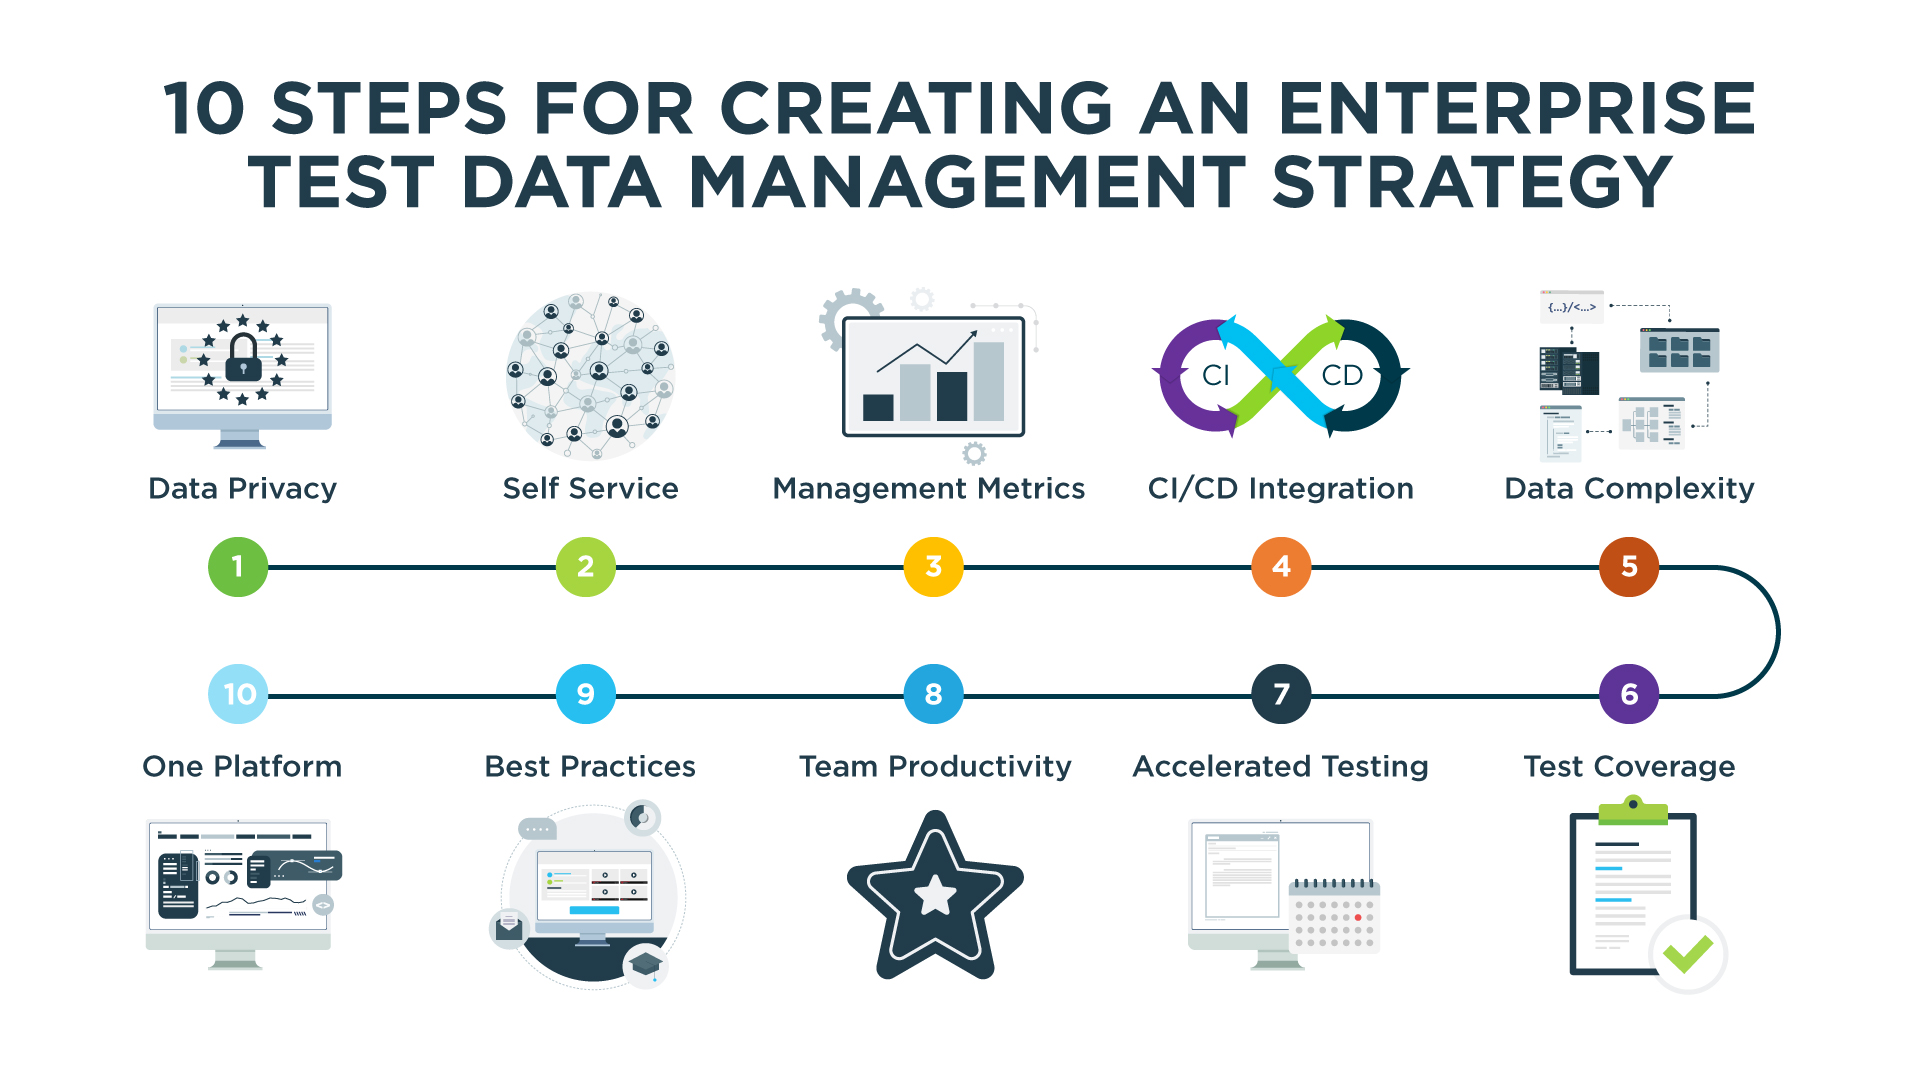 10 essential elements of an enterprise data provisioning strategy for test data management - Infographic showing key components including data privacy, self-service access, automation, CI/CD integration, complex data coverage, increased test coverage, accelerated SDLC, team productivity, upskilling, and unified platform.